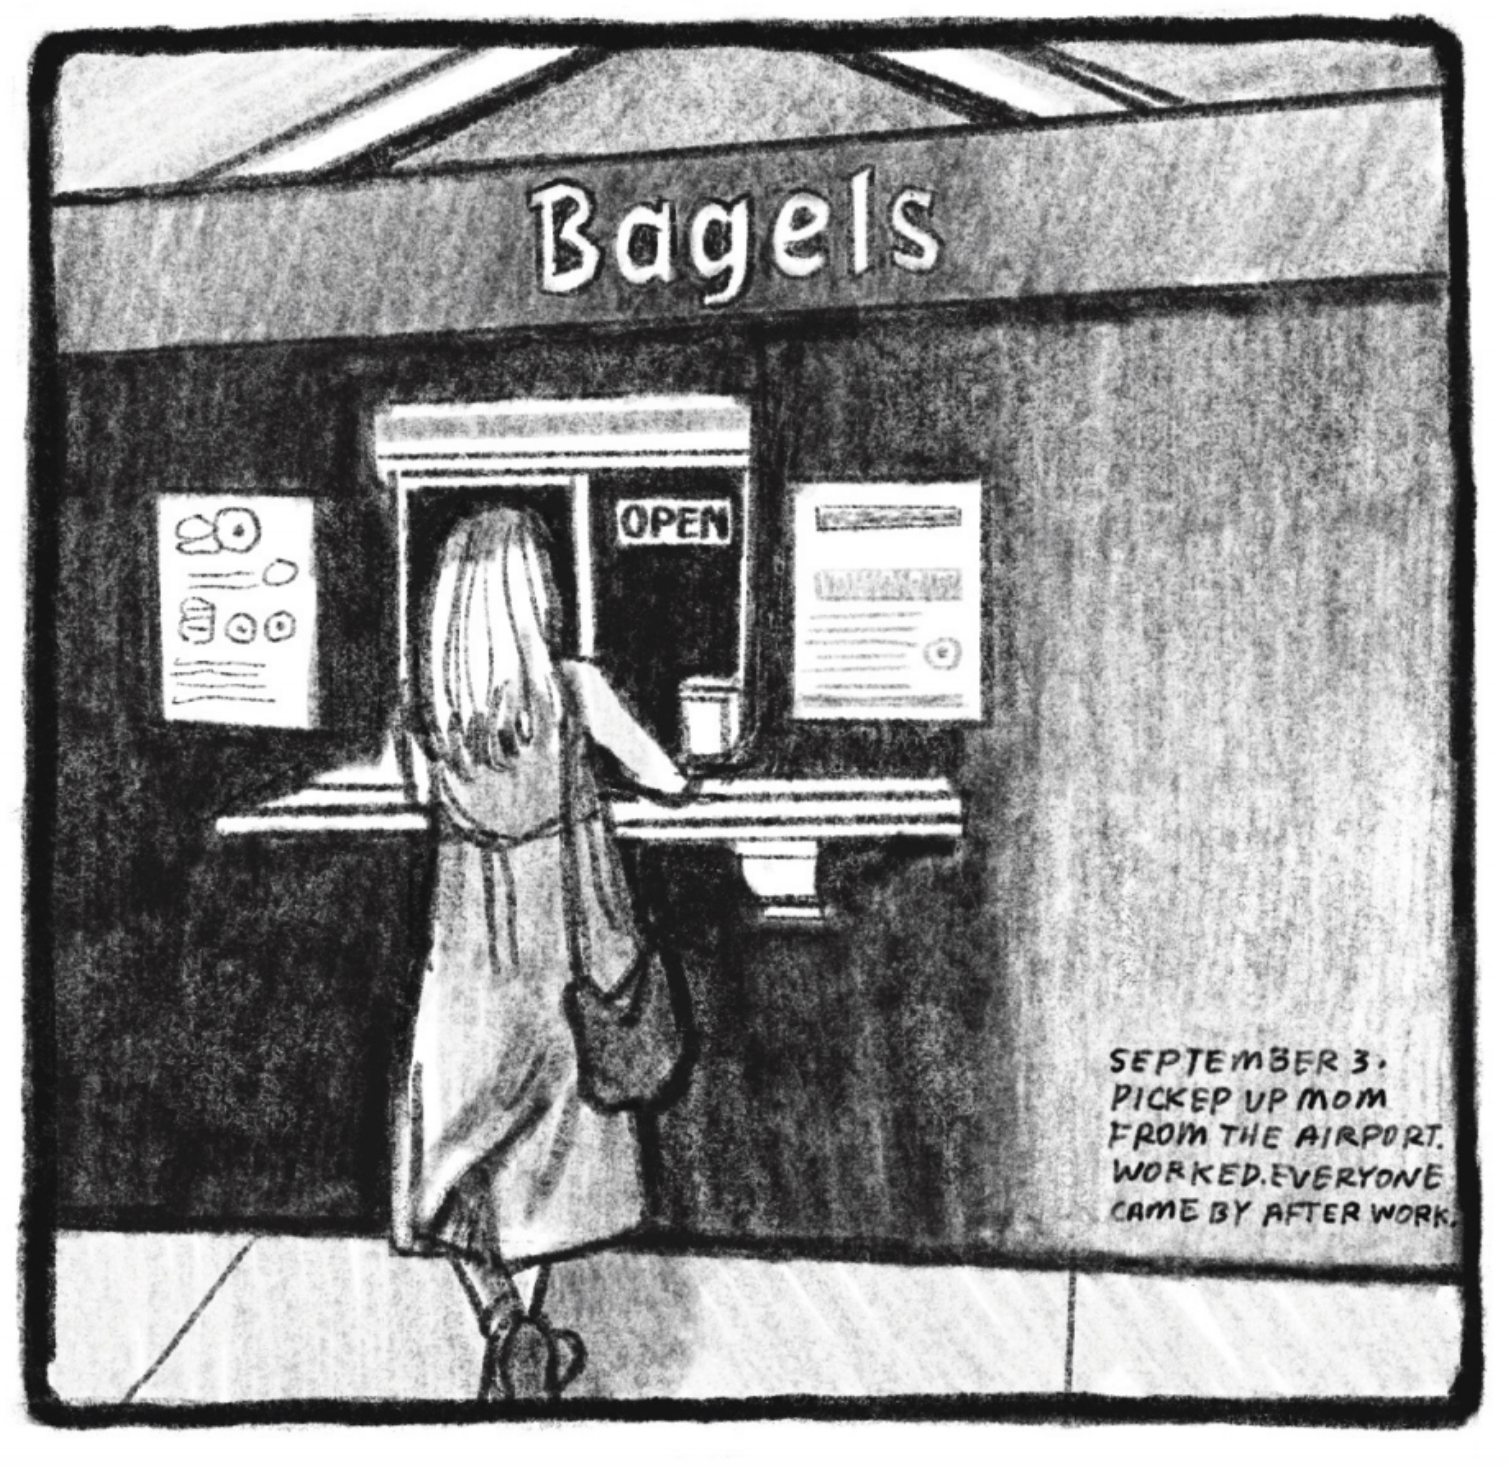 Kimâ€™s mom stands at the window of a food truck/stall with a sign that reads BAGELS. She is wearing a maxi dress with a purse hanging from her shoulder. â€œSeptember 3. Picked up mom from the airport. Worked. Everyone came by after work.â€